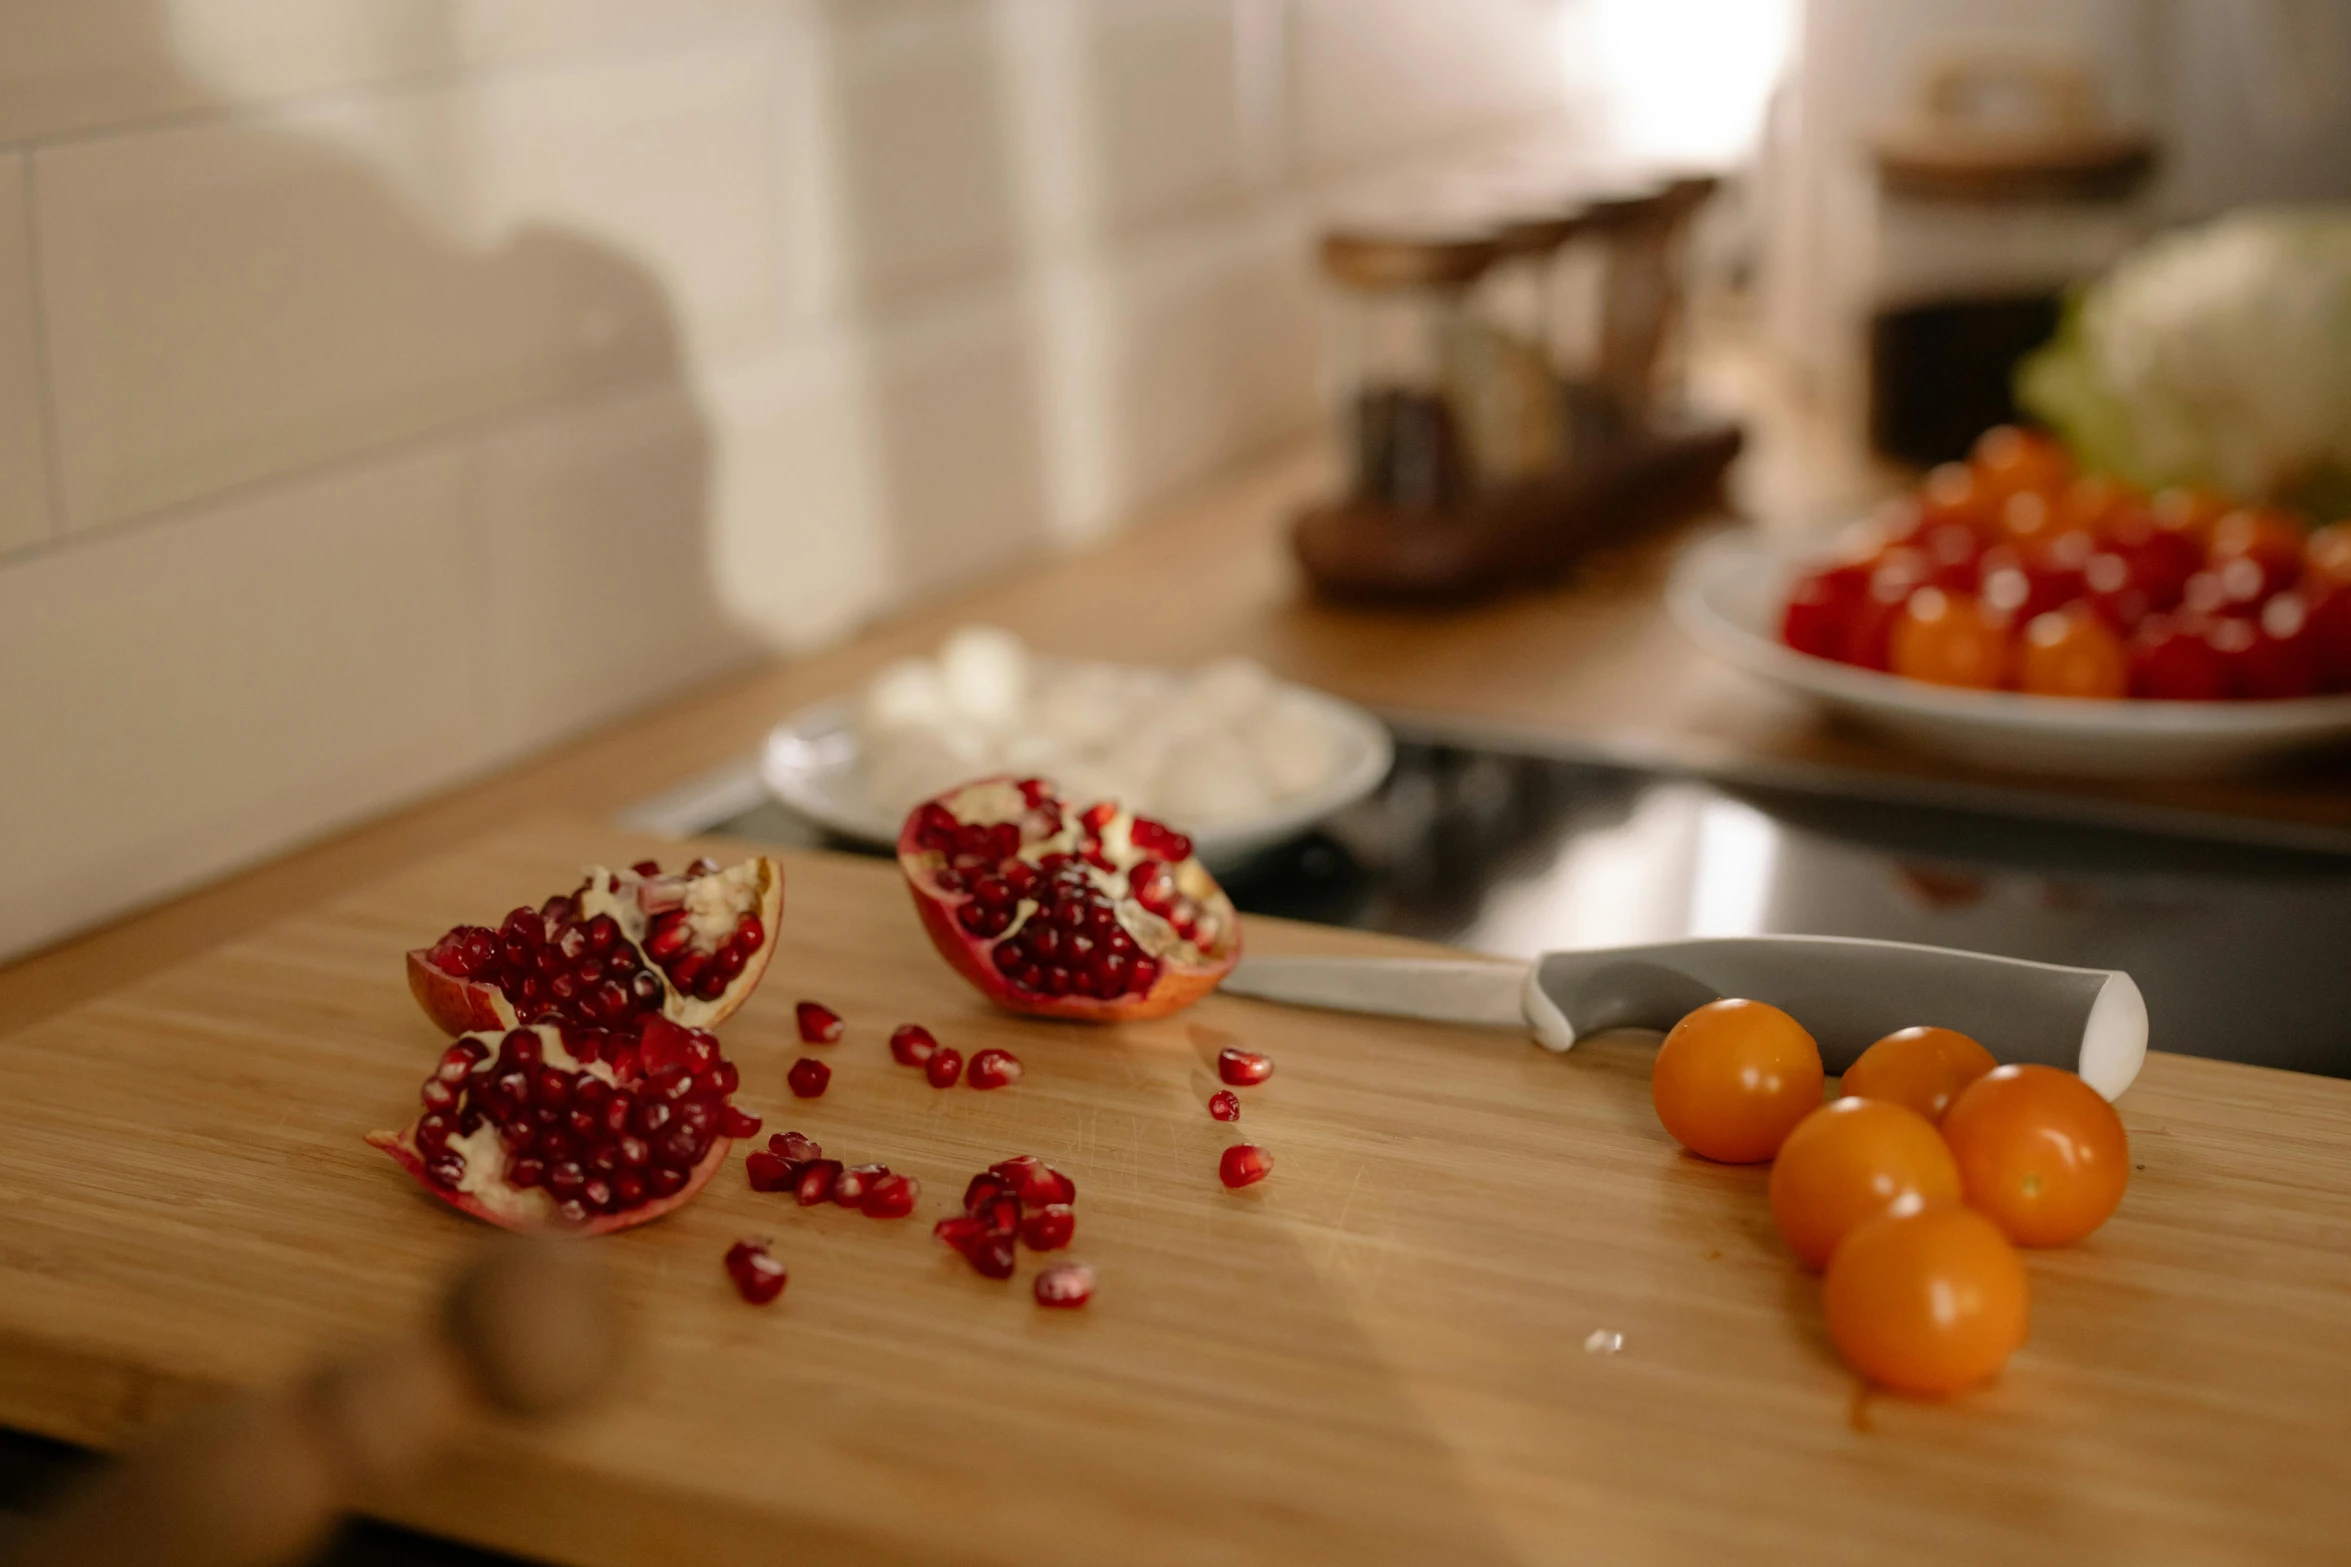 a counter with several fruits on it